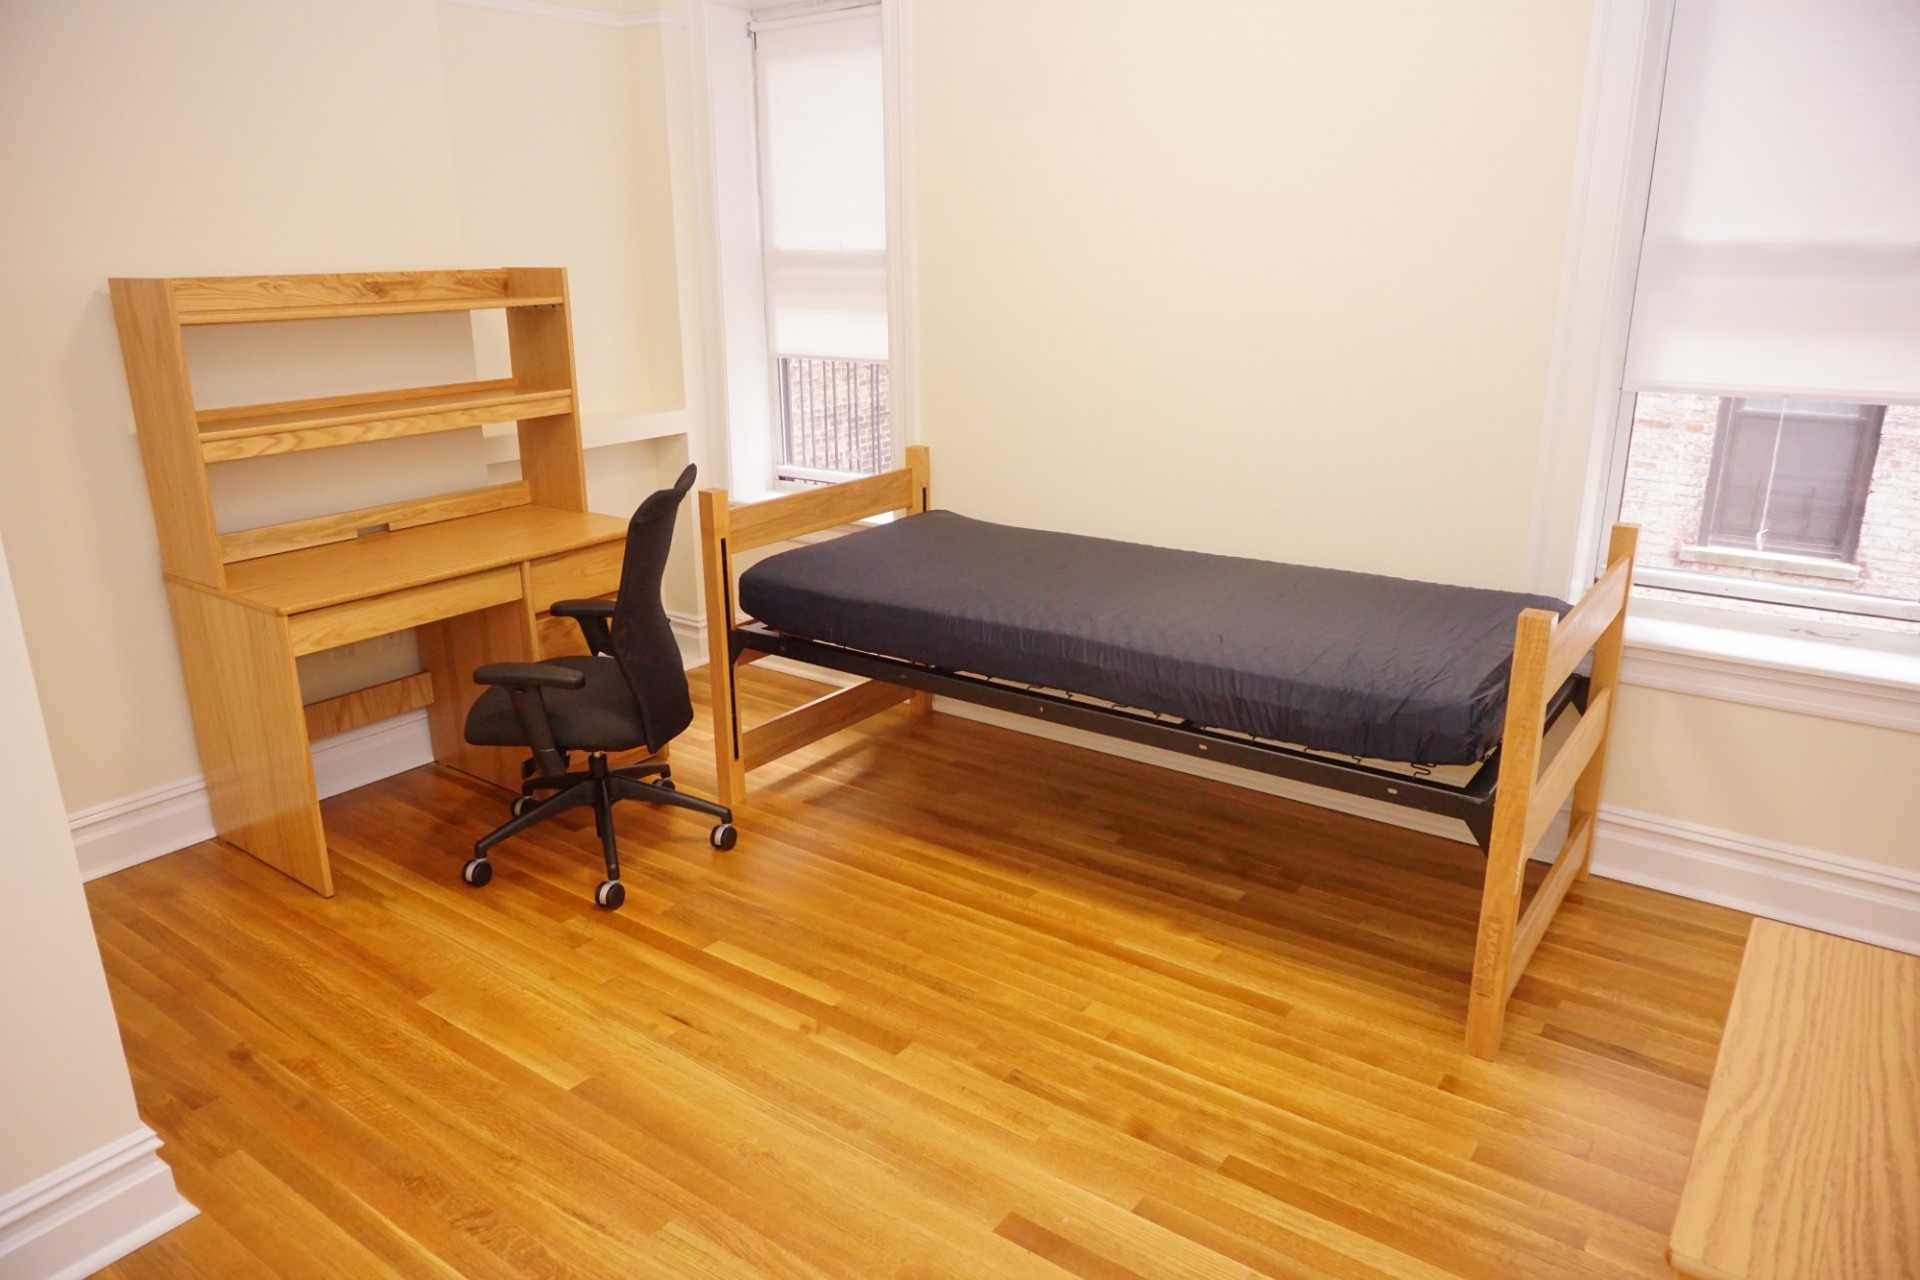 Example of a private bedroom in a two bedroom apartment share